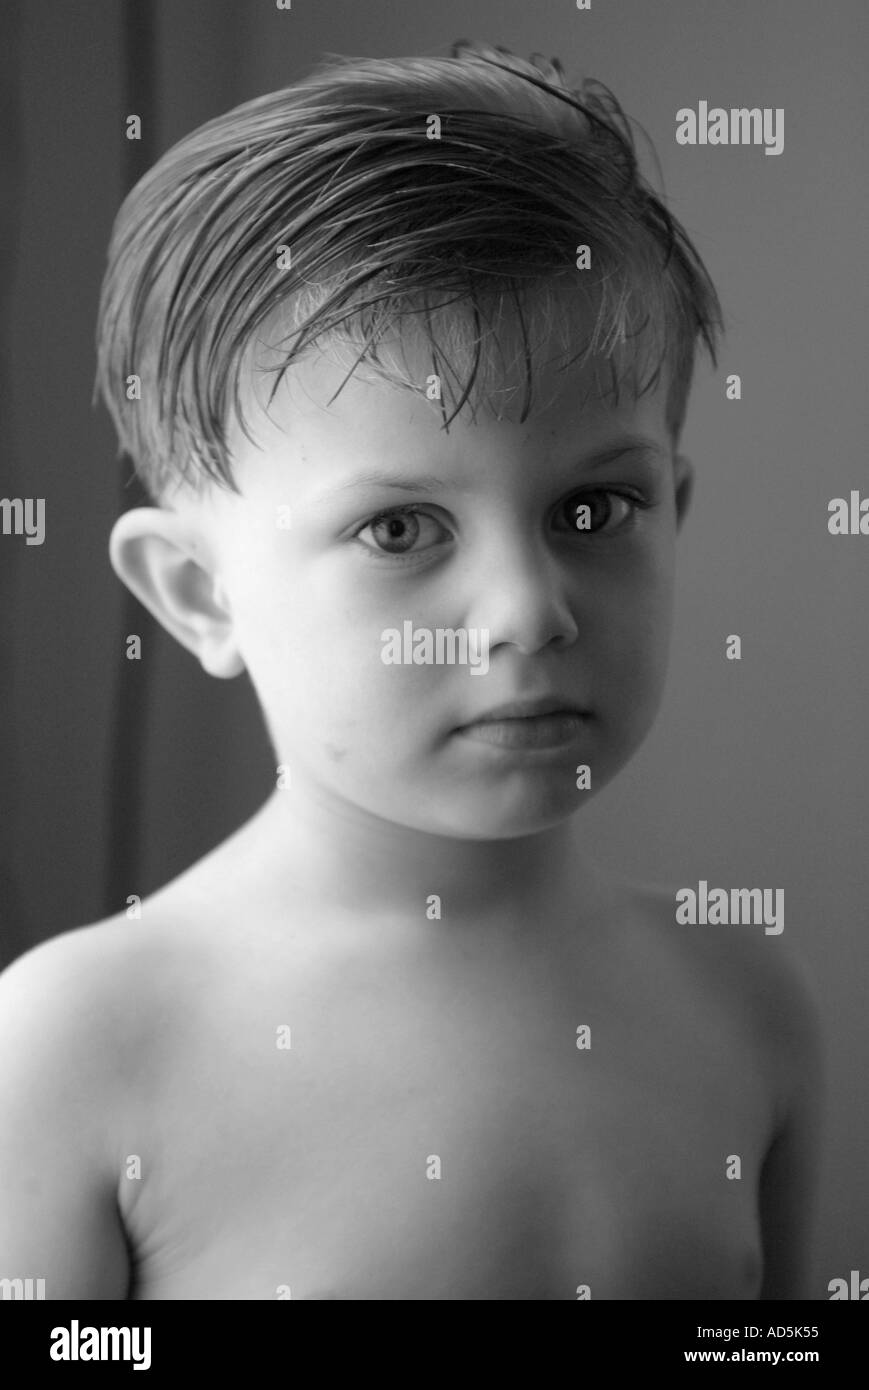 A child s face looking at camera Stock Photo